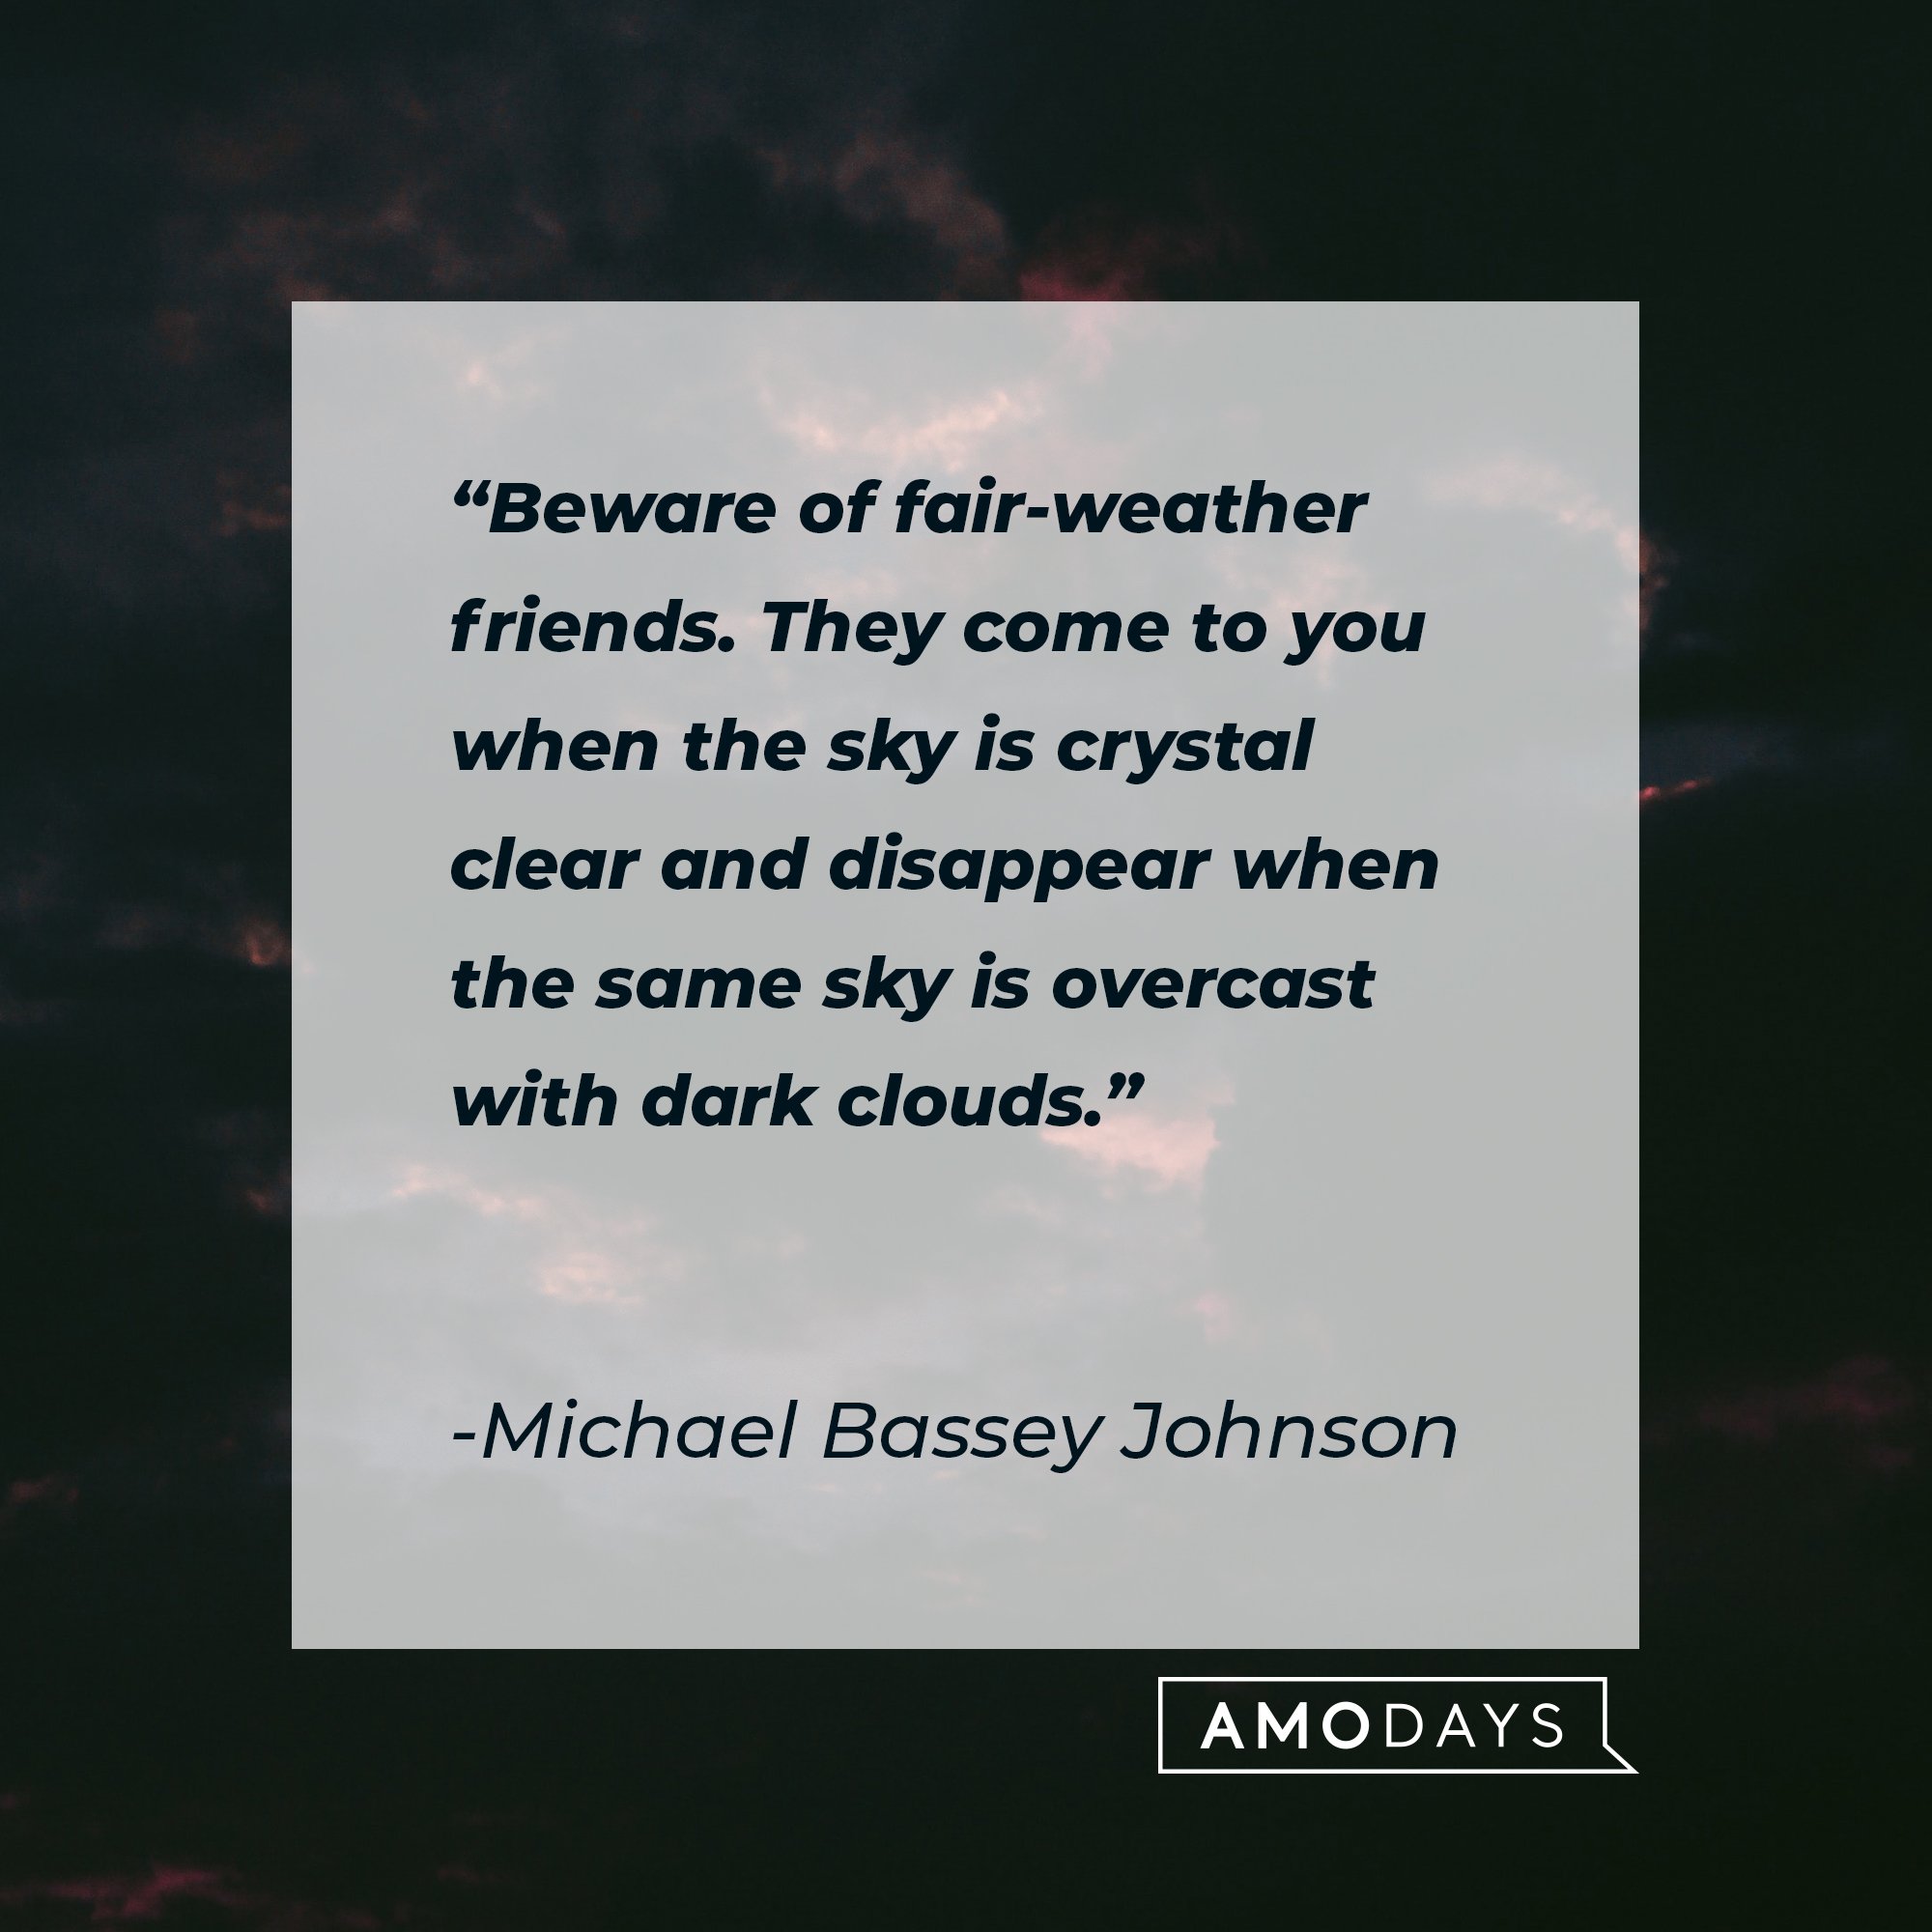  Michael Bassey Johnson’s quote: "Beware of fair-weather friends. They come to you when the sky is crystal clear and disappear when the same sky is overcast with dark clouds." | Image: AmoDays